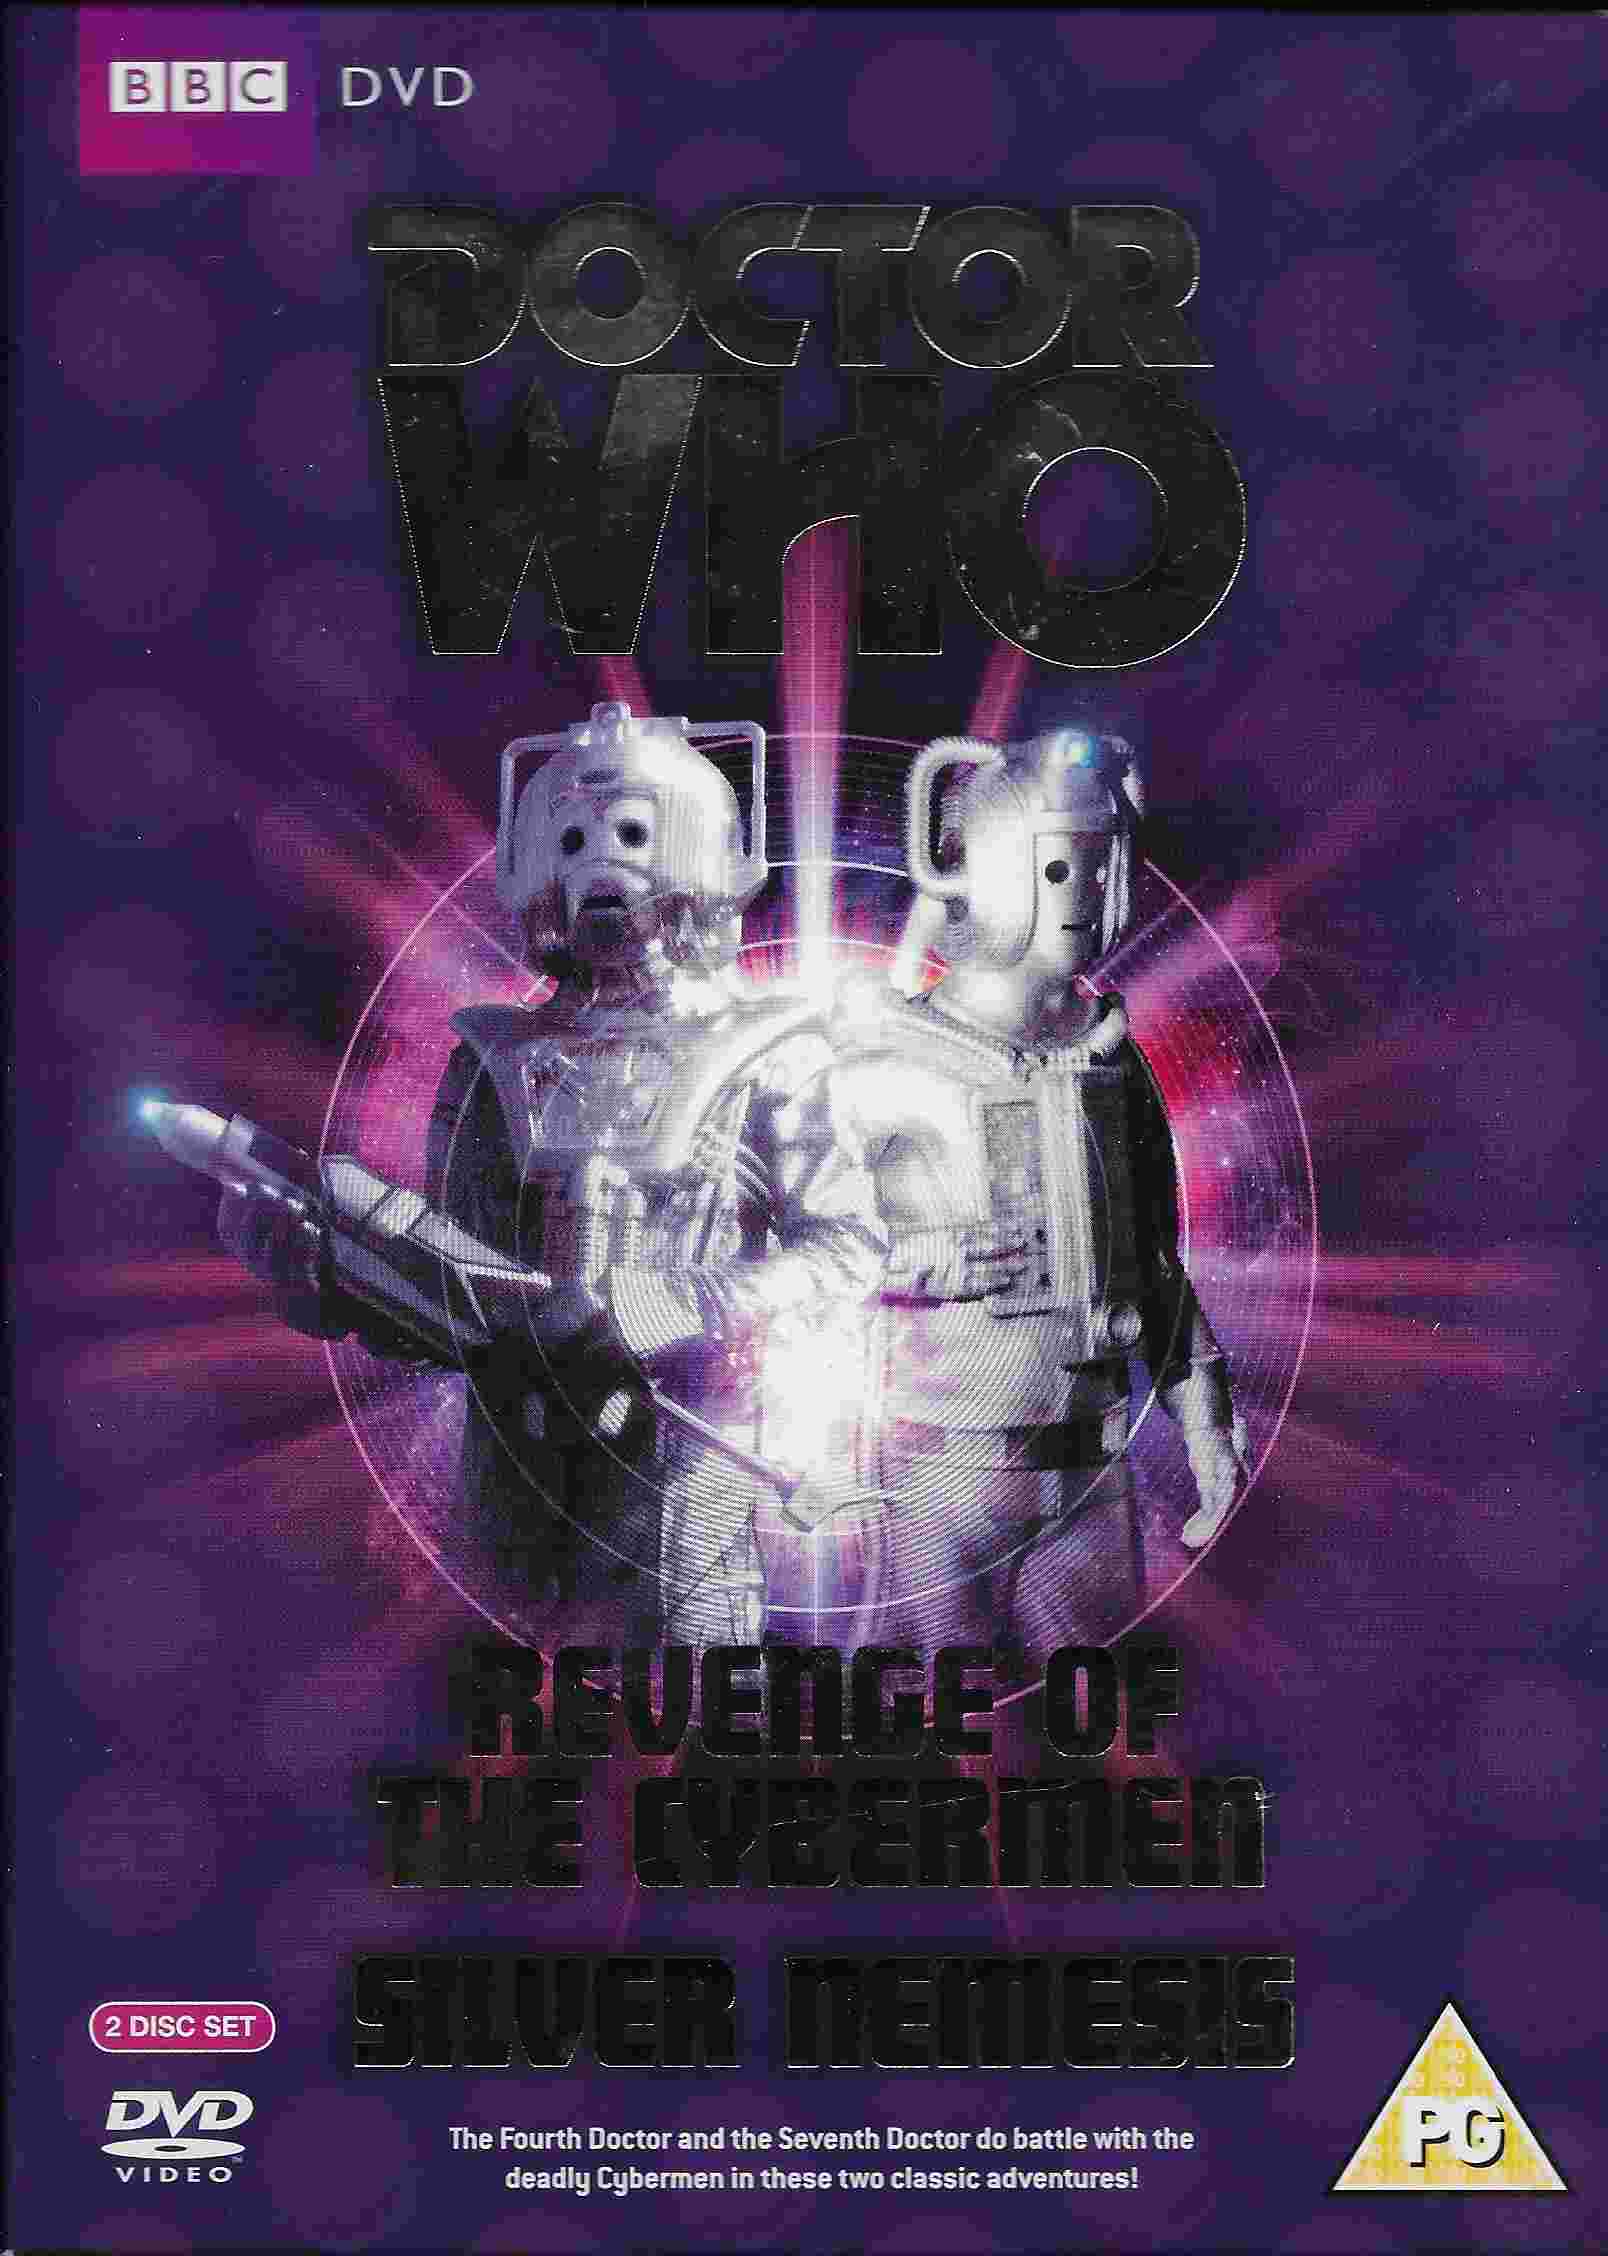 Picture of BBCDVD 2854 Doctor Who - Revenge of the Cybermen / Silver nemesis by artist Gerry Davis / Kevin Clarke from the BBC dvds - Records and Tapes library